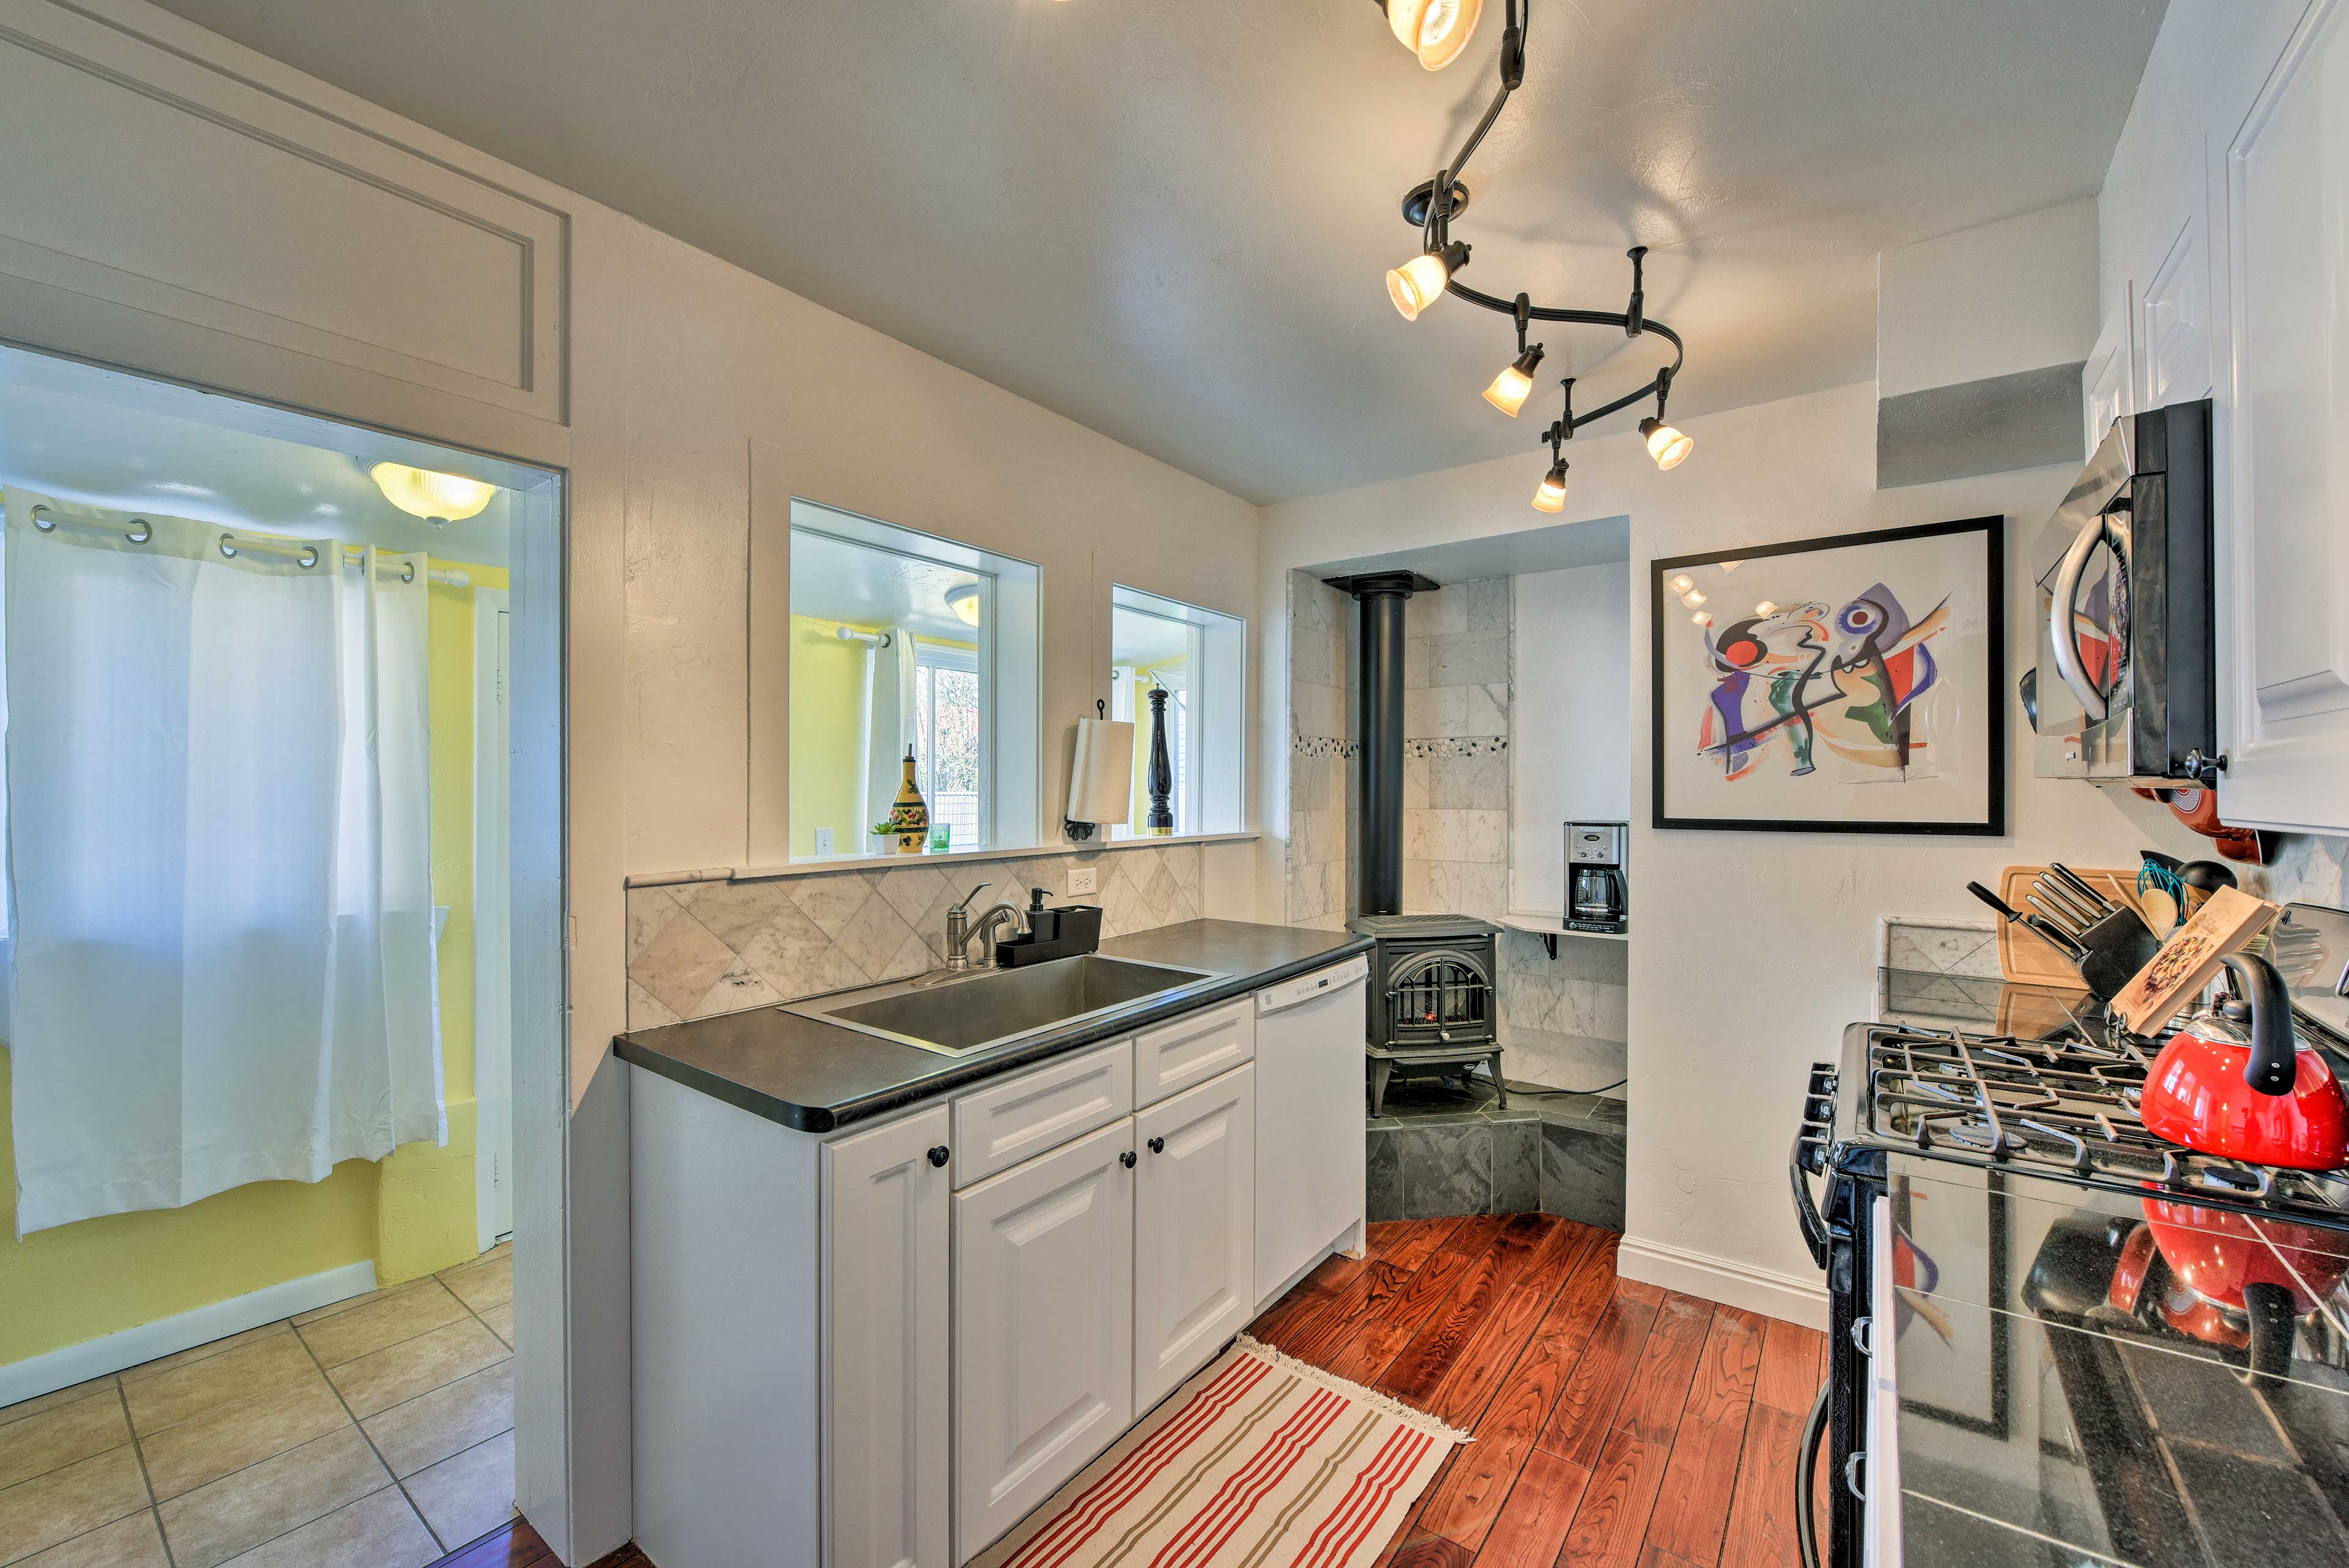 The kitchen is fully equipped, boasting windows to the sunroom.